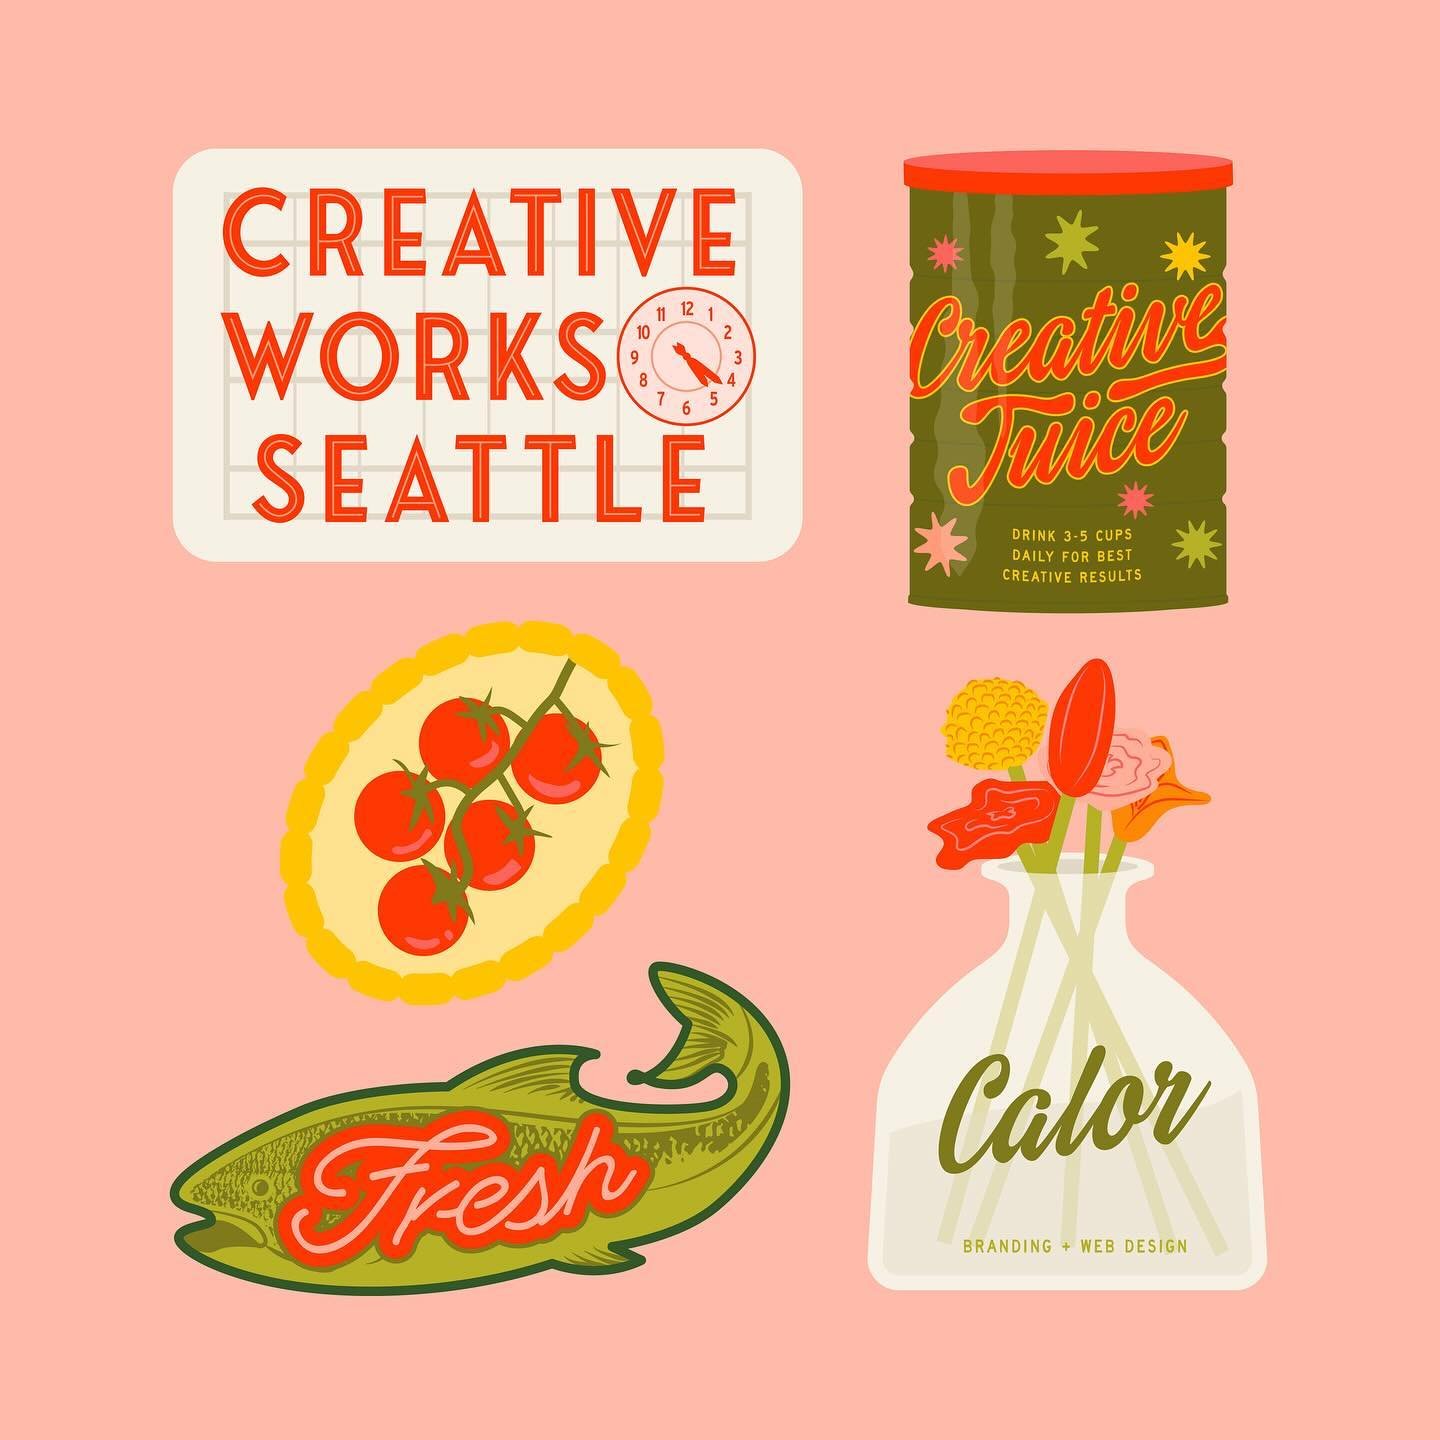 One more sleep until Seattle!

We&rsquo;re heading west for @creativeworks this week! Looking forward to learning new things and making new friends 🌞

If you&rsquo;ll be there, let&rsquo;s meet! We&rsquo;ve got sticker packs to get rid of 😁

#creat